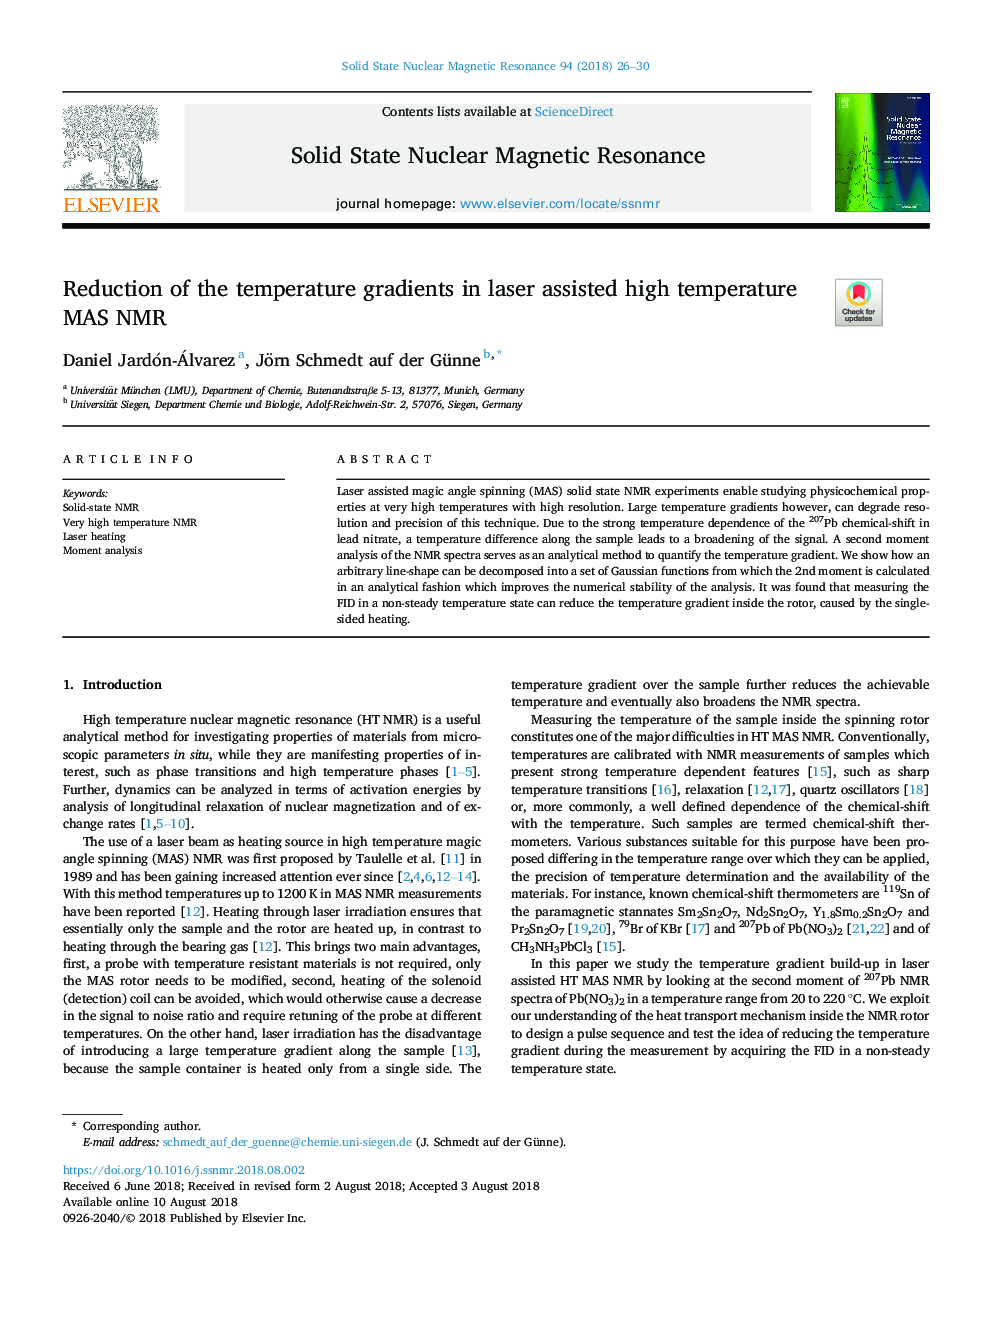 Reduction of the temperature gradients in laser assisted high temperature MAS NMR